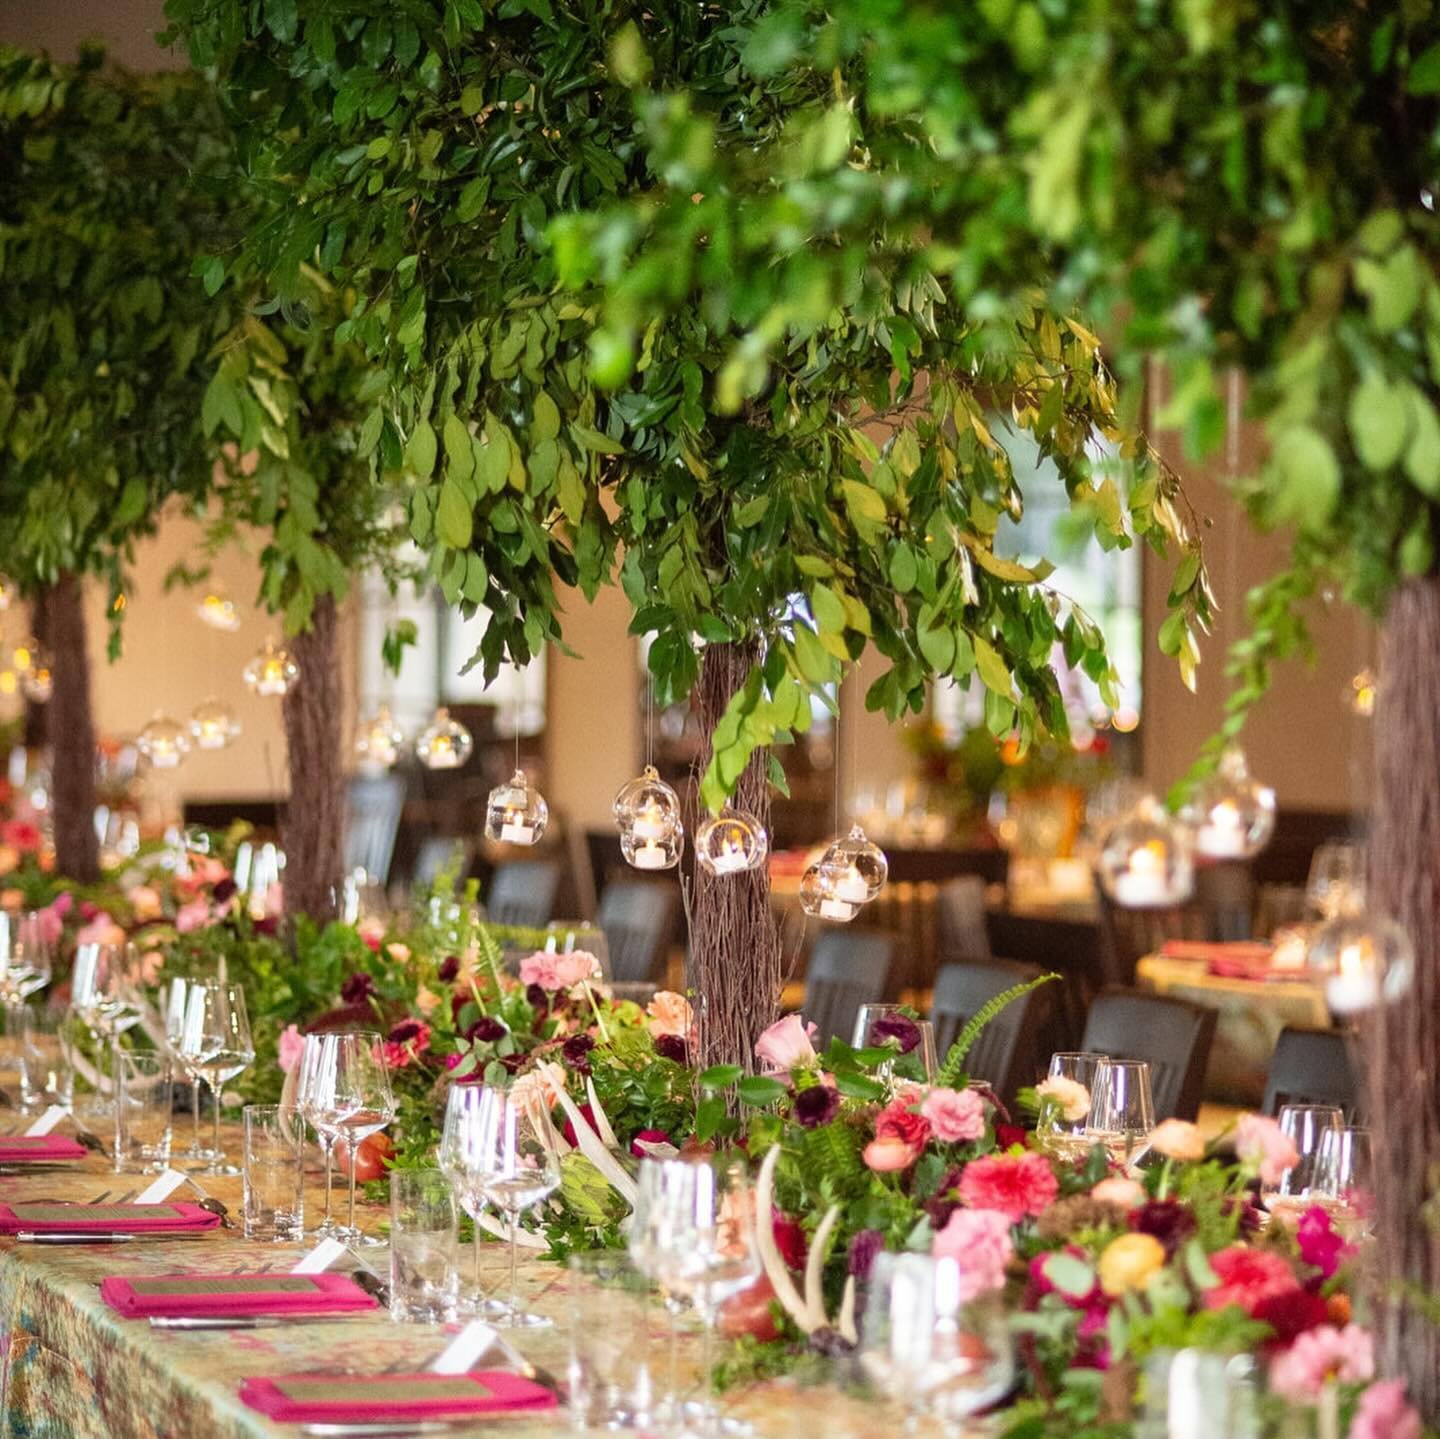 There are more ways to use candlelight than just on the tables ✨ Like hanging in trees! 
#candles #weddingcandles #eventcandles #corporateevents #corporateeventrentals #austincorporateevents #austineventrentals #austinweddingrentals #dallasevents #da